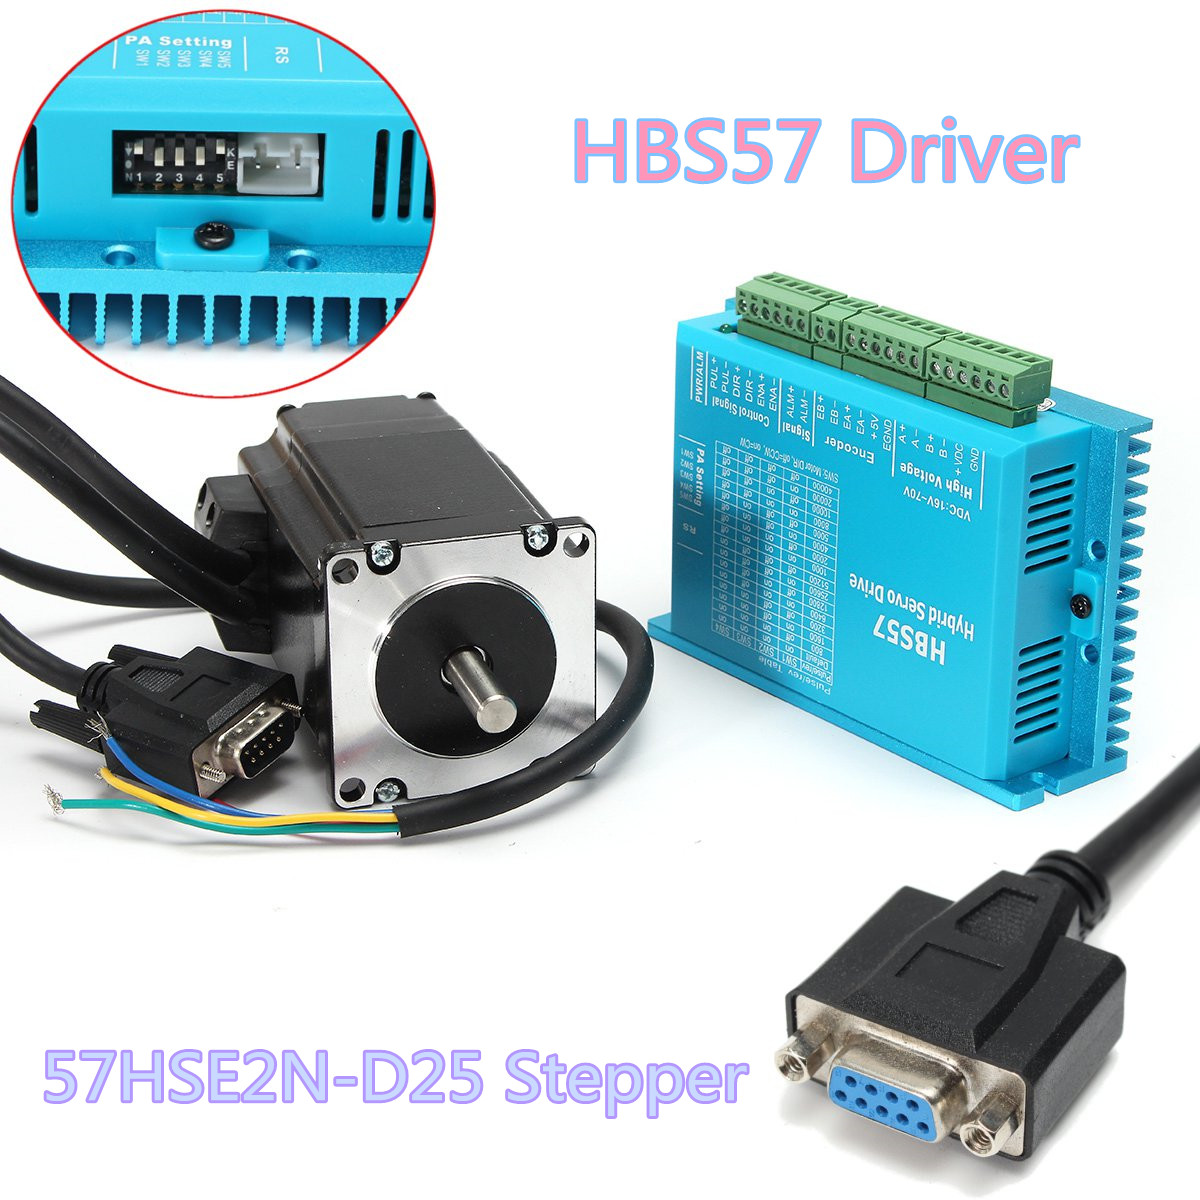 High Speed Closed Loop Stepper Motor + HBS57 Stepper Driver + Coding Cable Kit 13